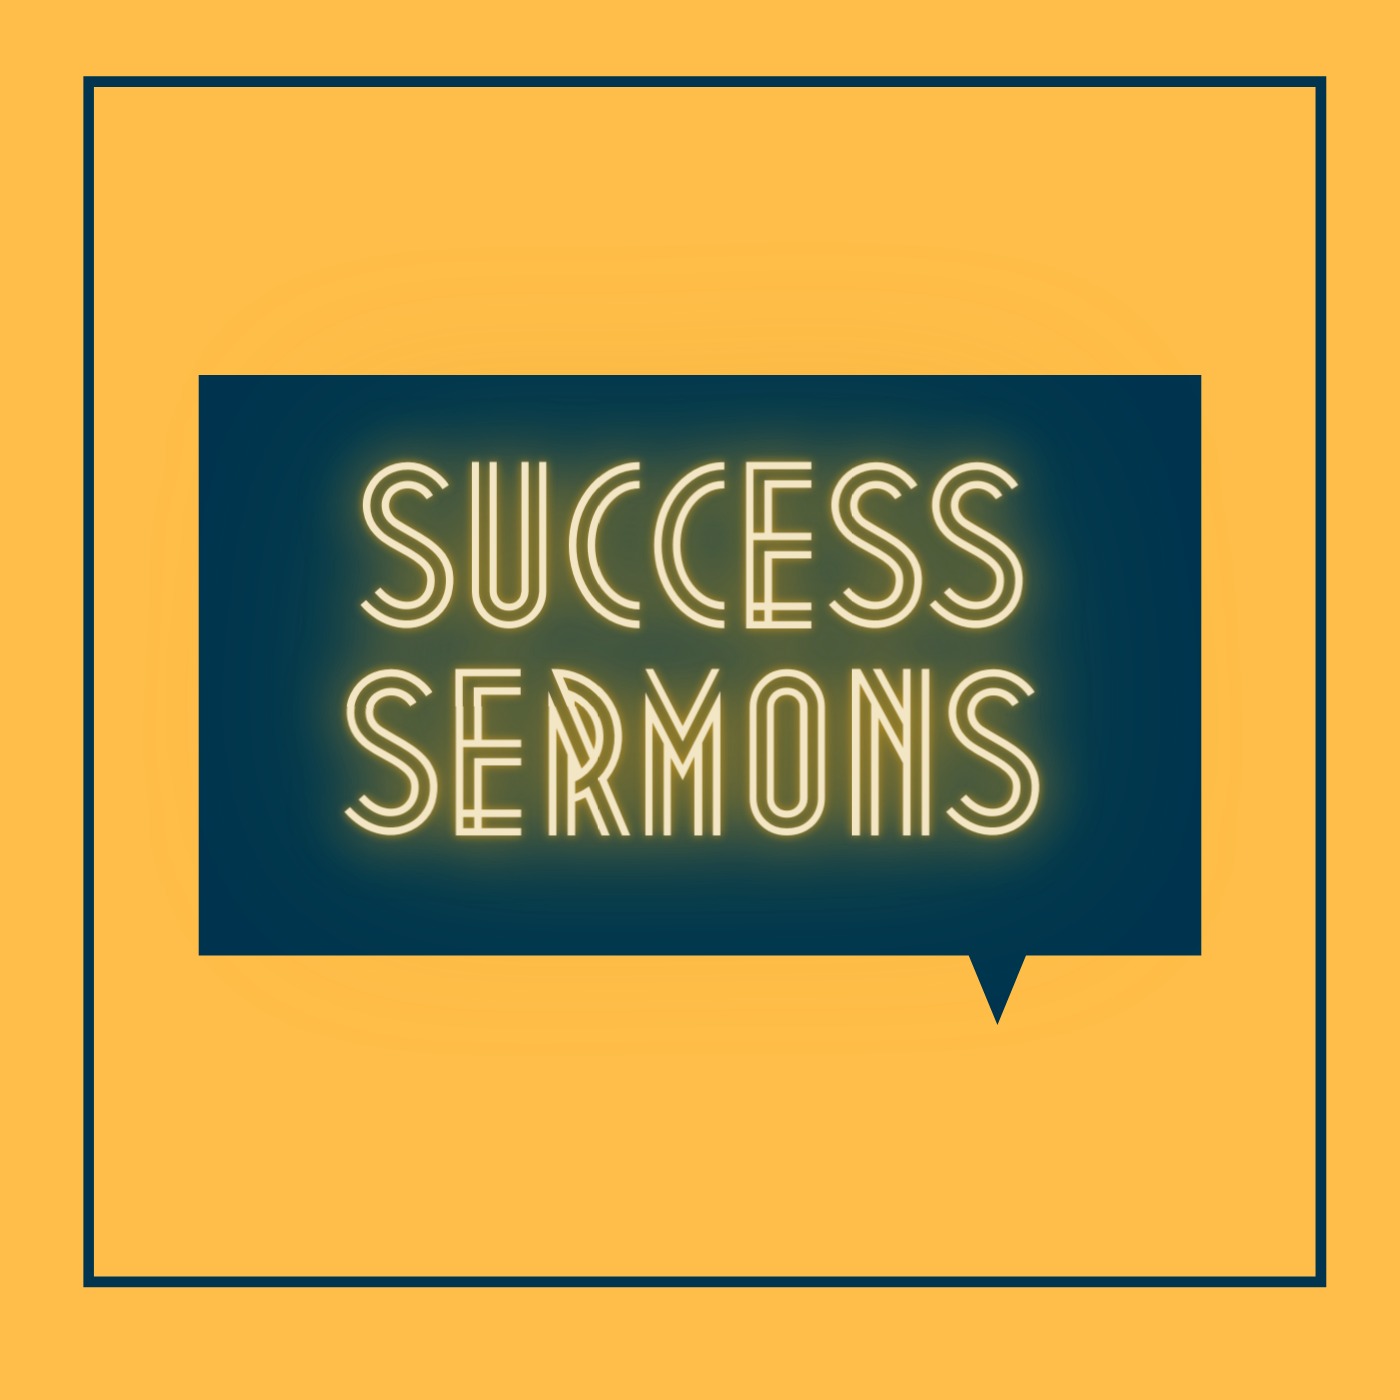 Two Questions to Help You Increase Daily Success EP 255 #SuccessSermons